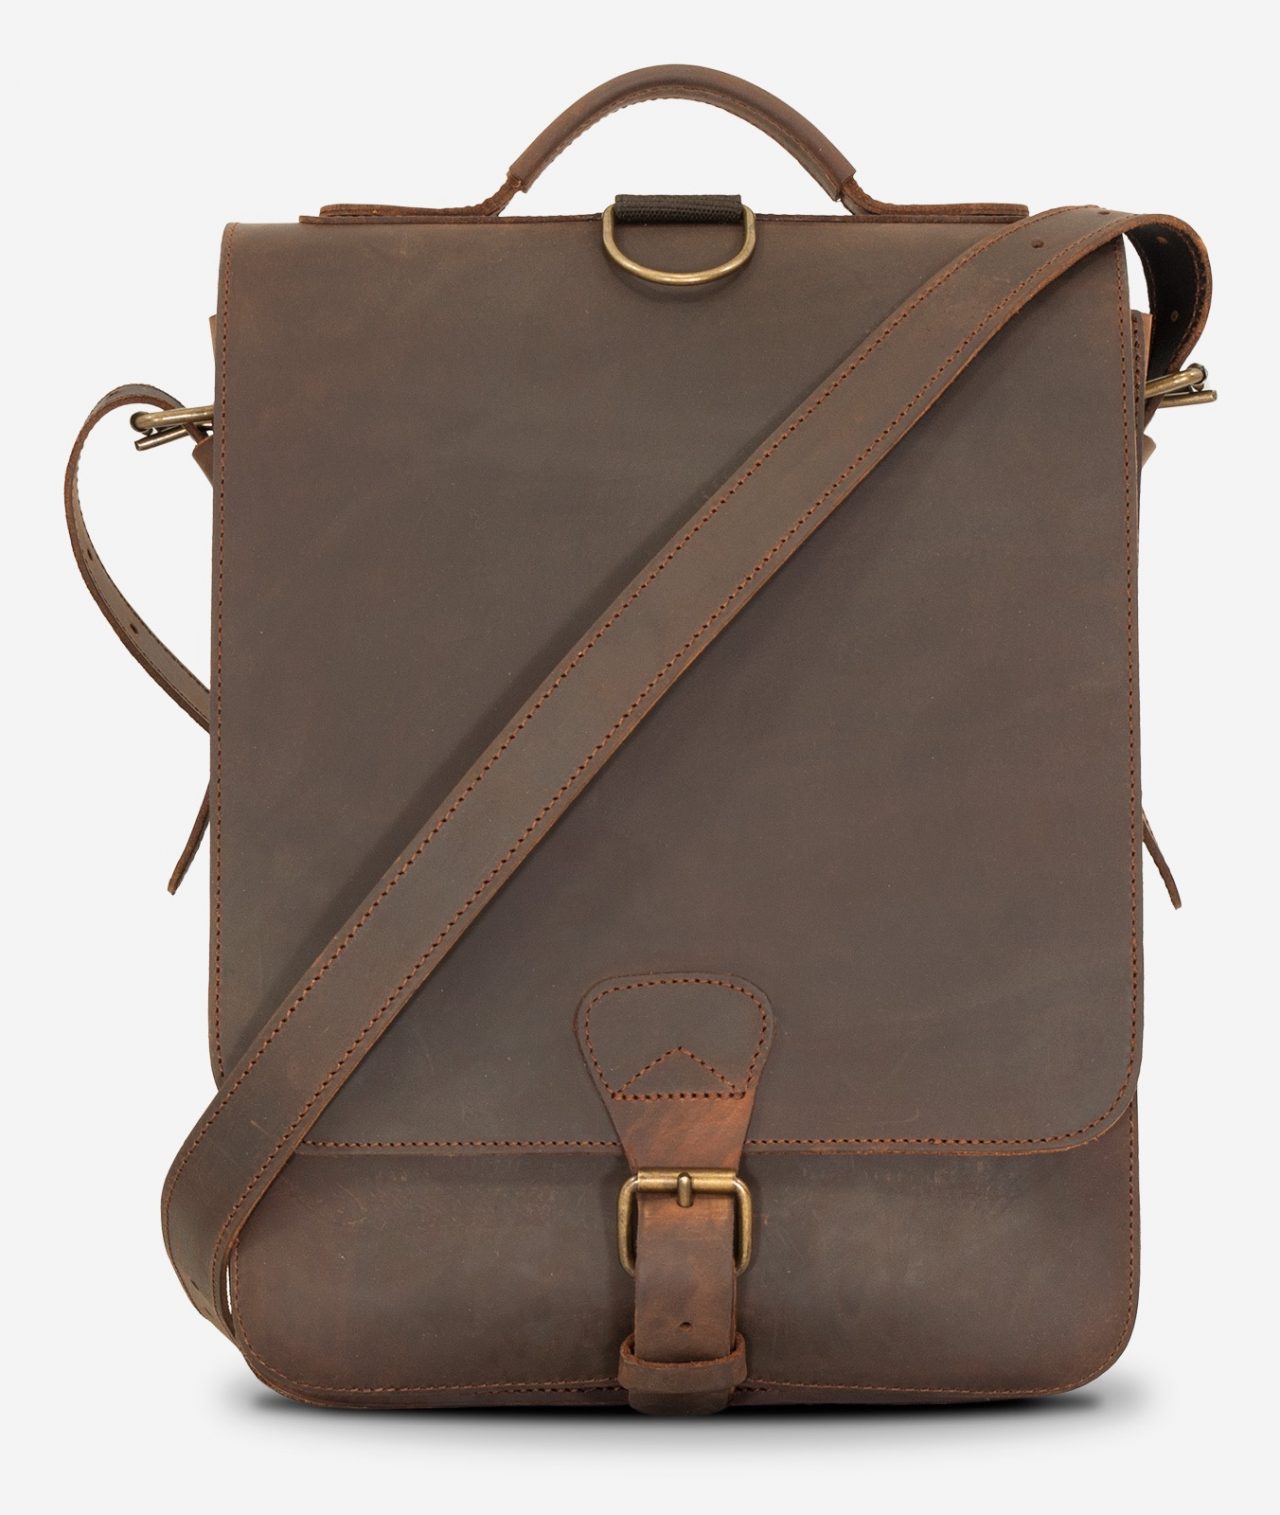 Front view of the vegetable-tanned brown leather backpack with shoulder belt.